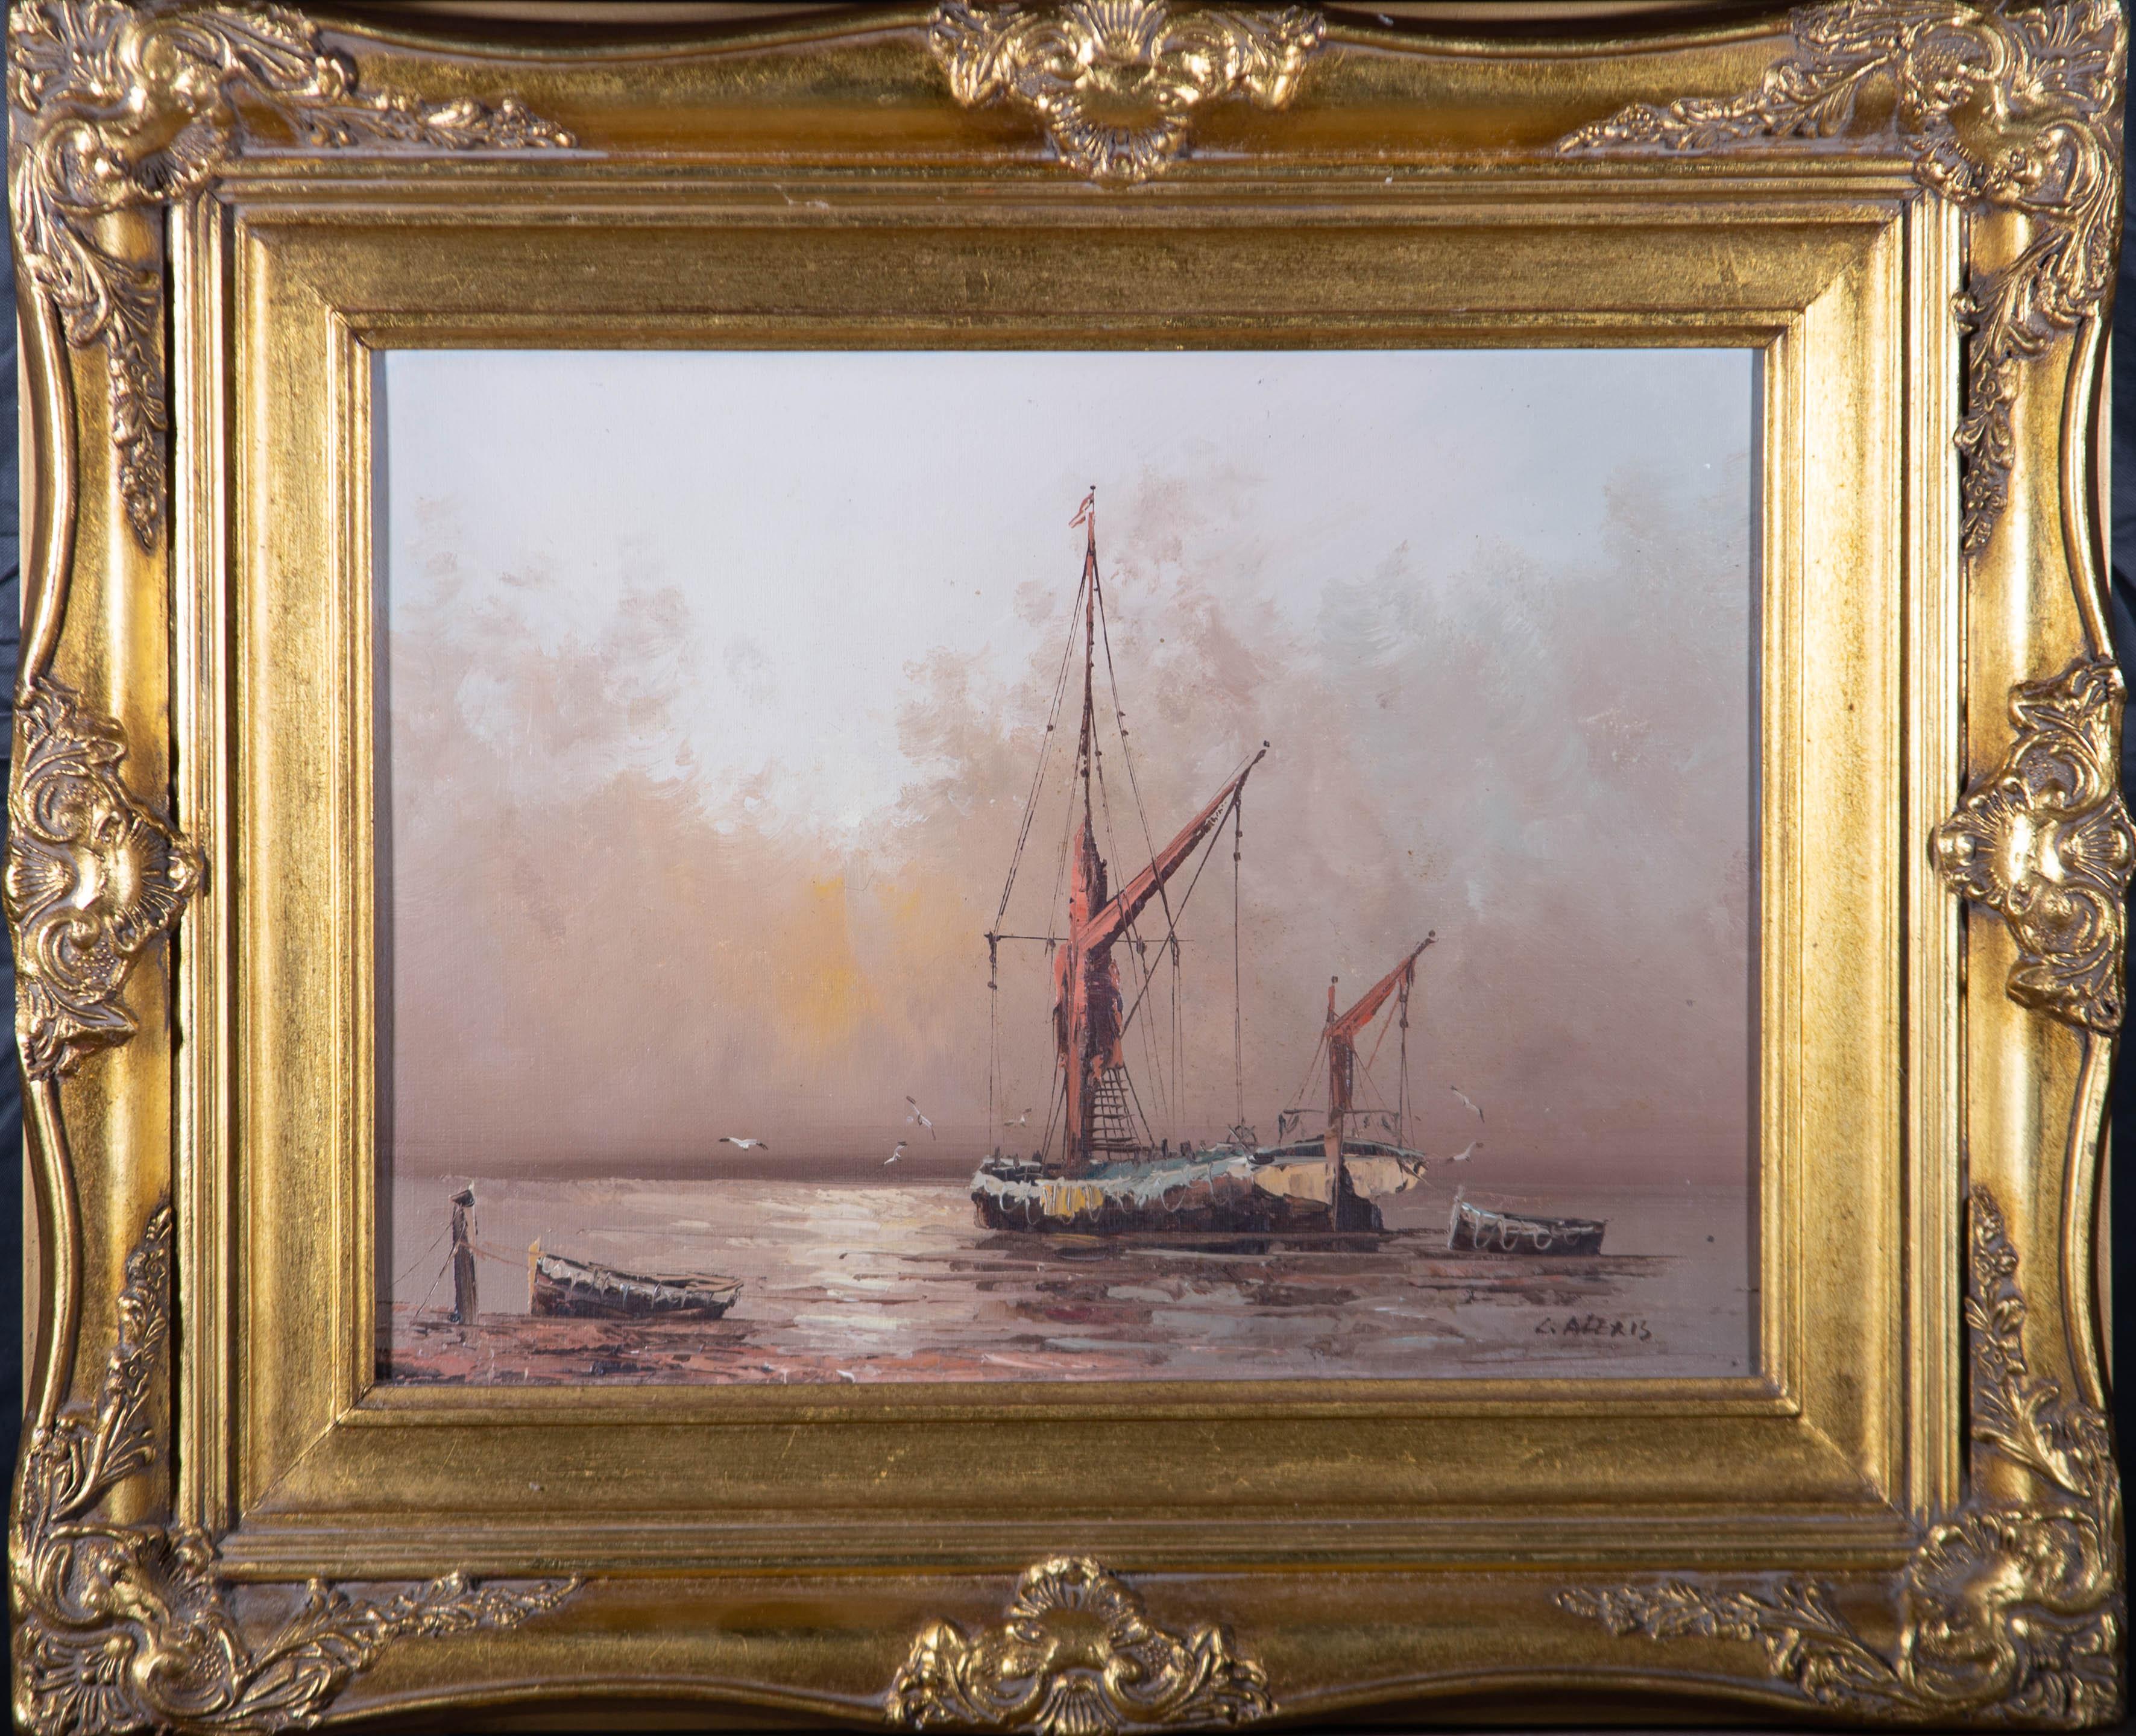 A seascape featuring a fishing boat and two rowing boats at harbour. Presented in an ornate gilt-effect frame. Signed to the lower-right edge. On canvas board.
